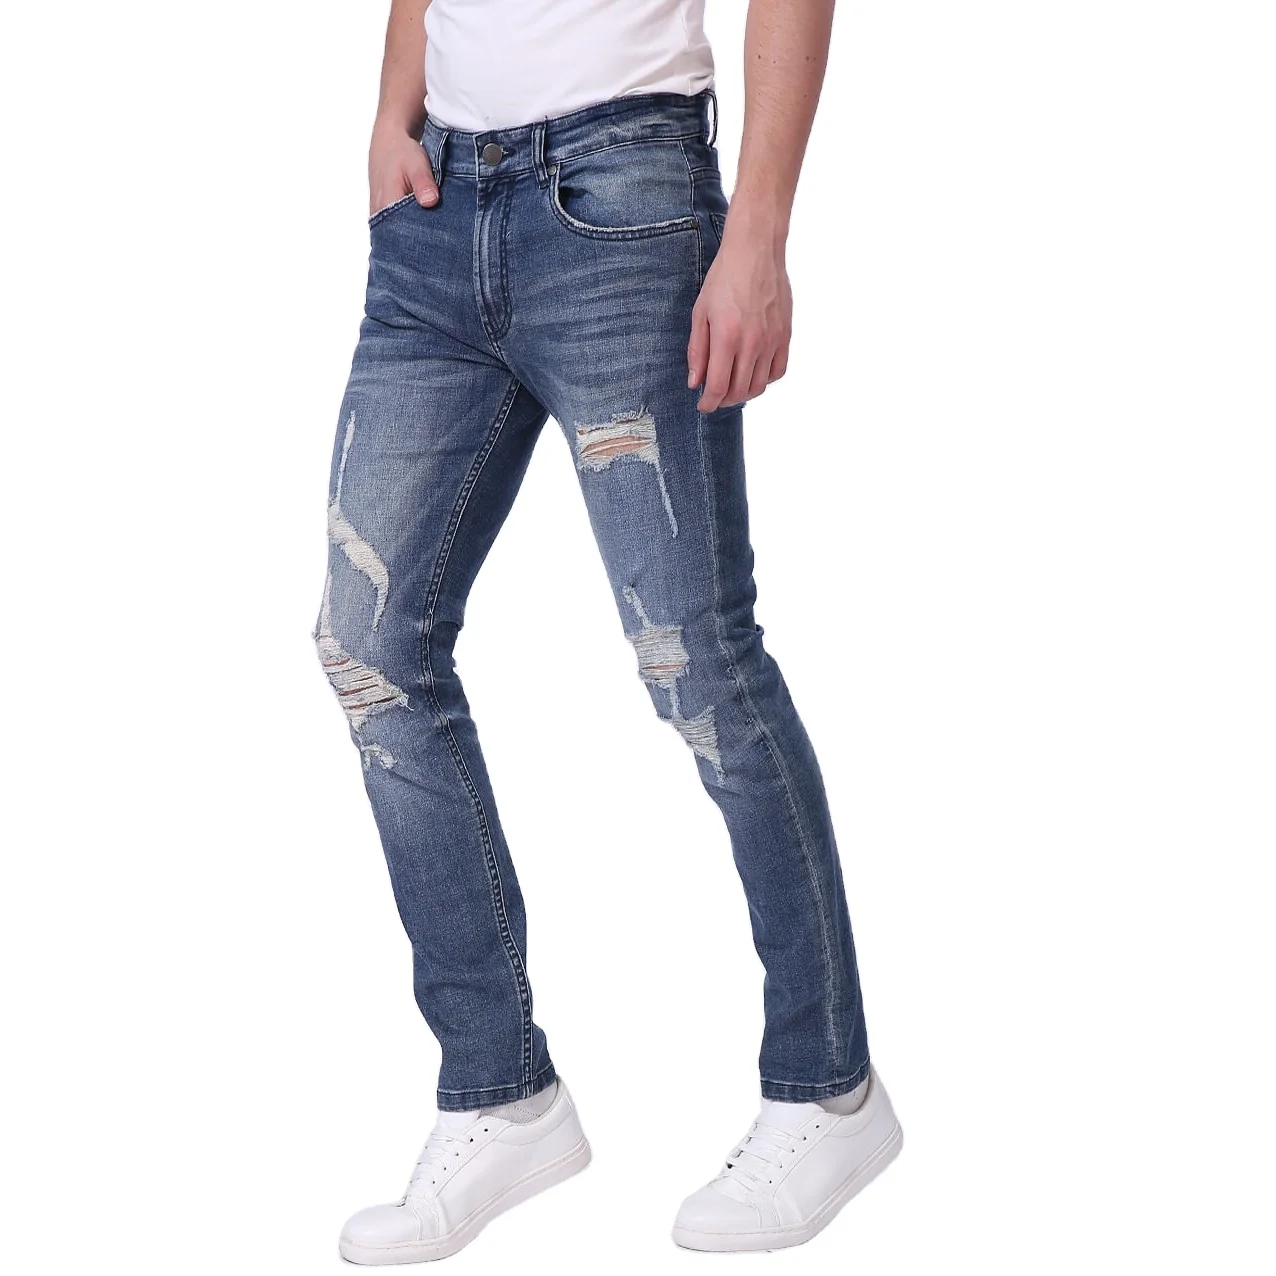 2021 Cheap Price Fashionable Straight Thin Denim Wholesale Men's Jeans Pant From Bangladesh - Buy Jeans Denim Men Pants Pant Jeans Mens Denim Jeans Ripped Jeans Men Stitching Jeans,Jeans Men